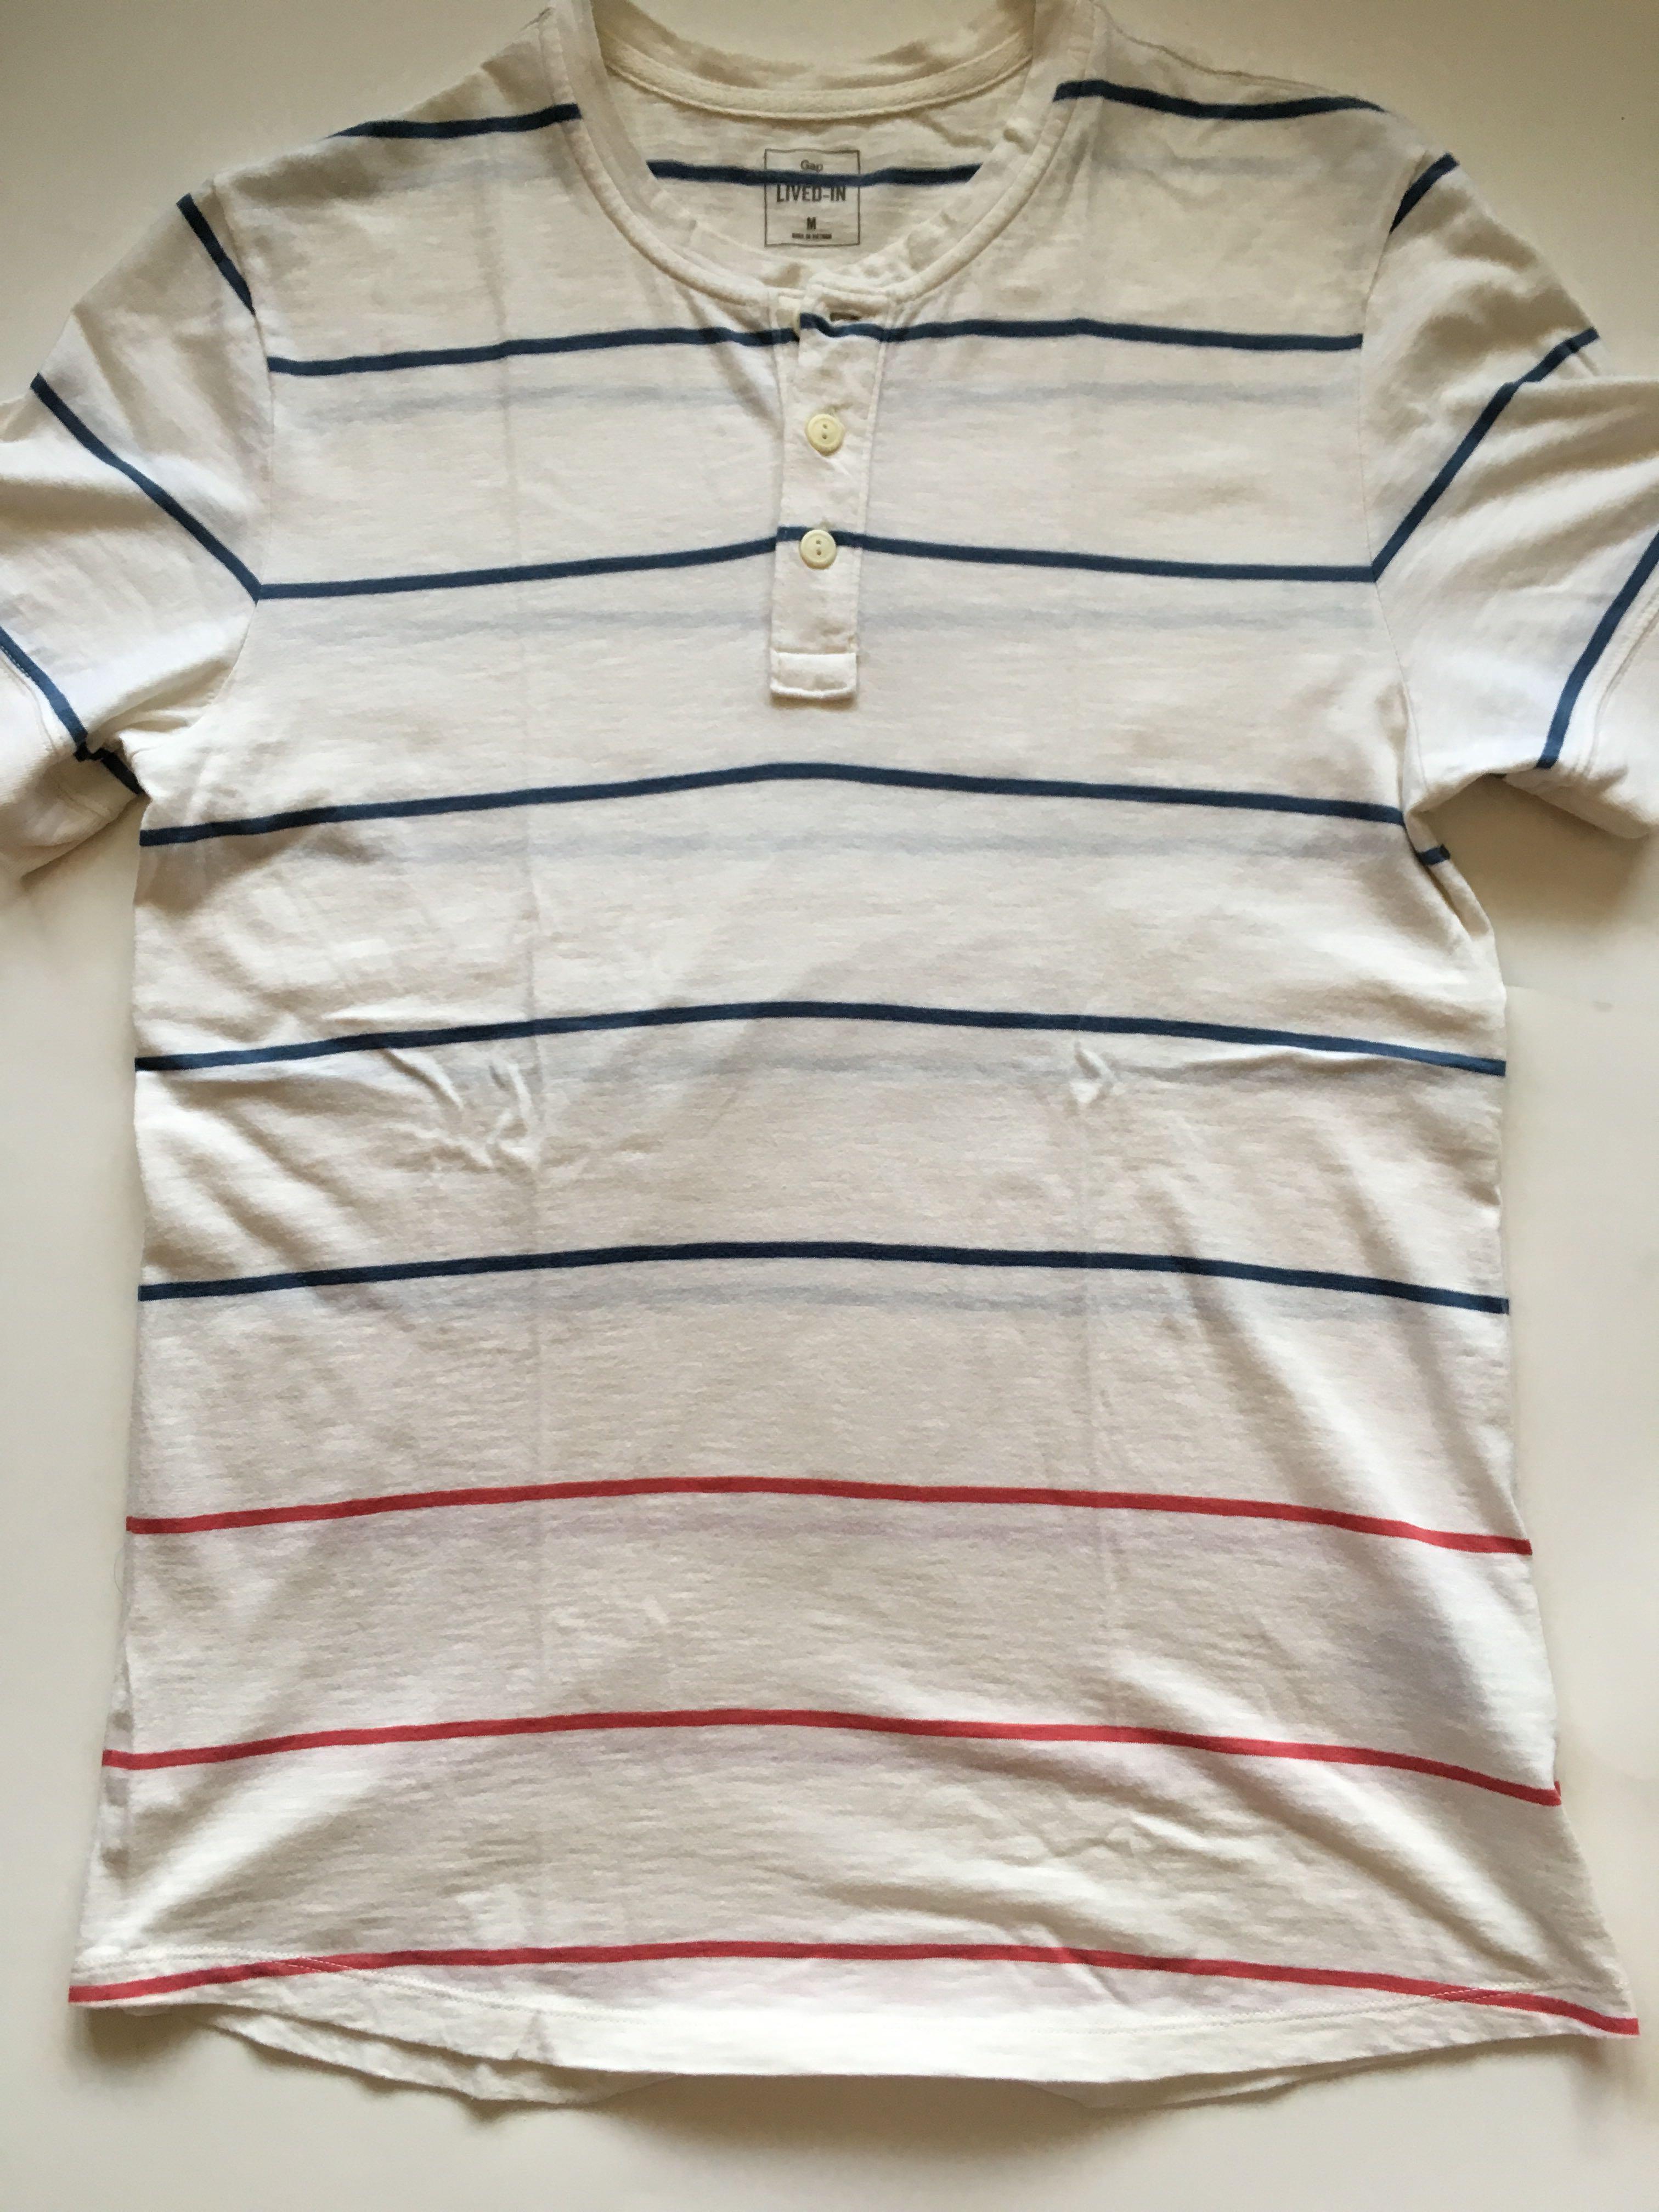 Gap Polo Shirt Price Philippines Polo T Shirts Outlet Official